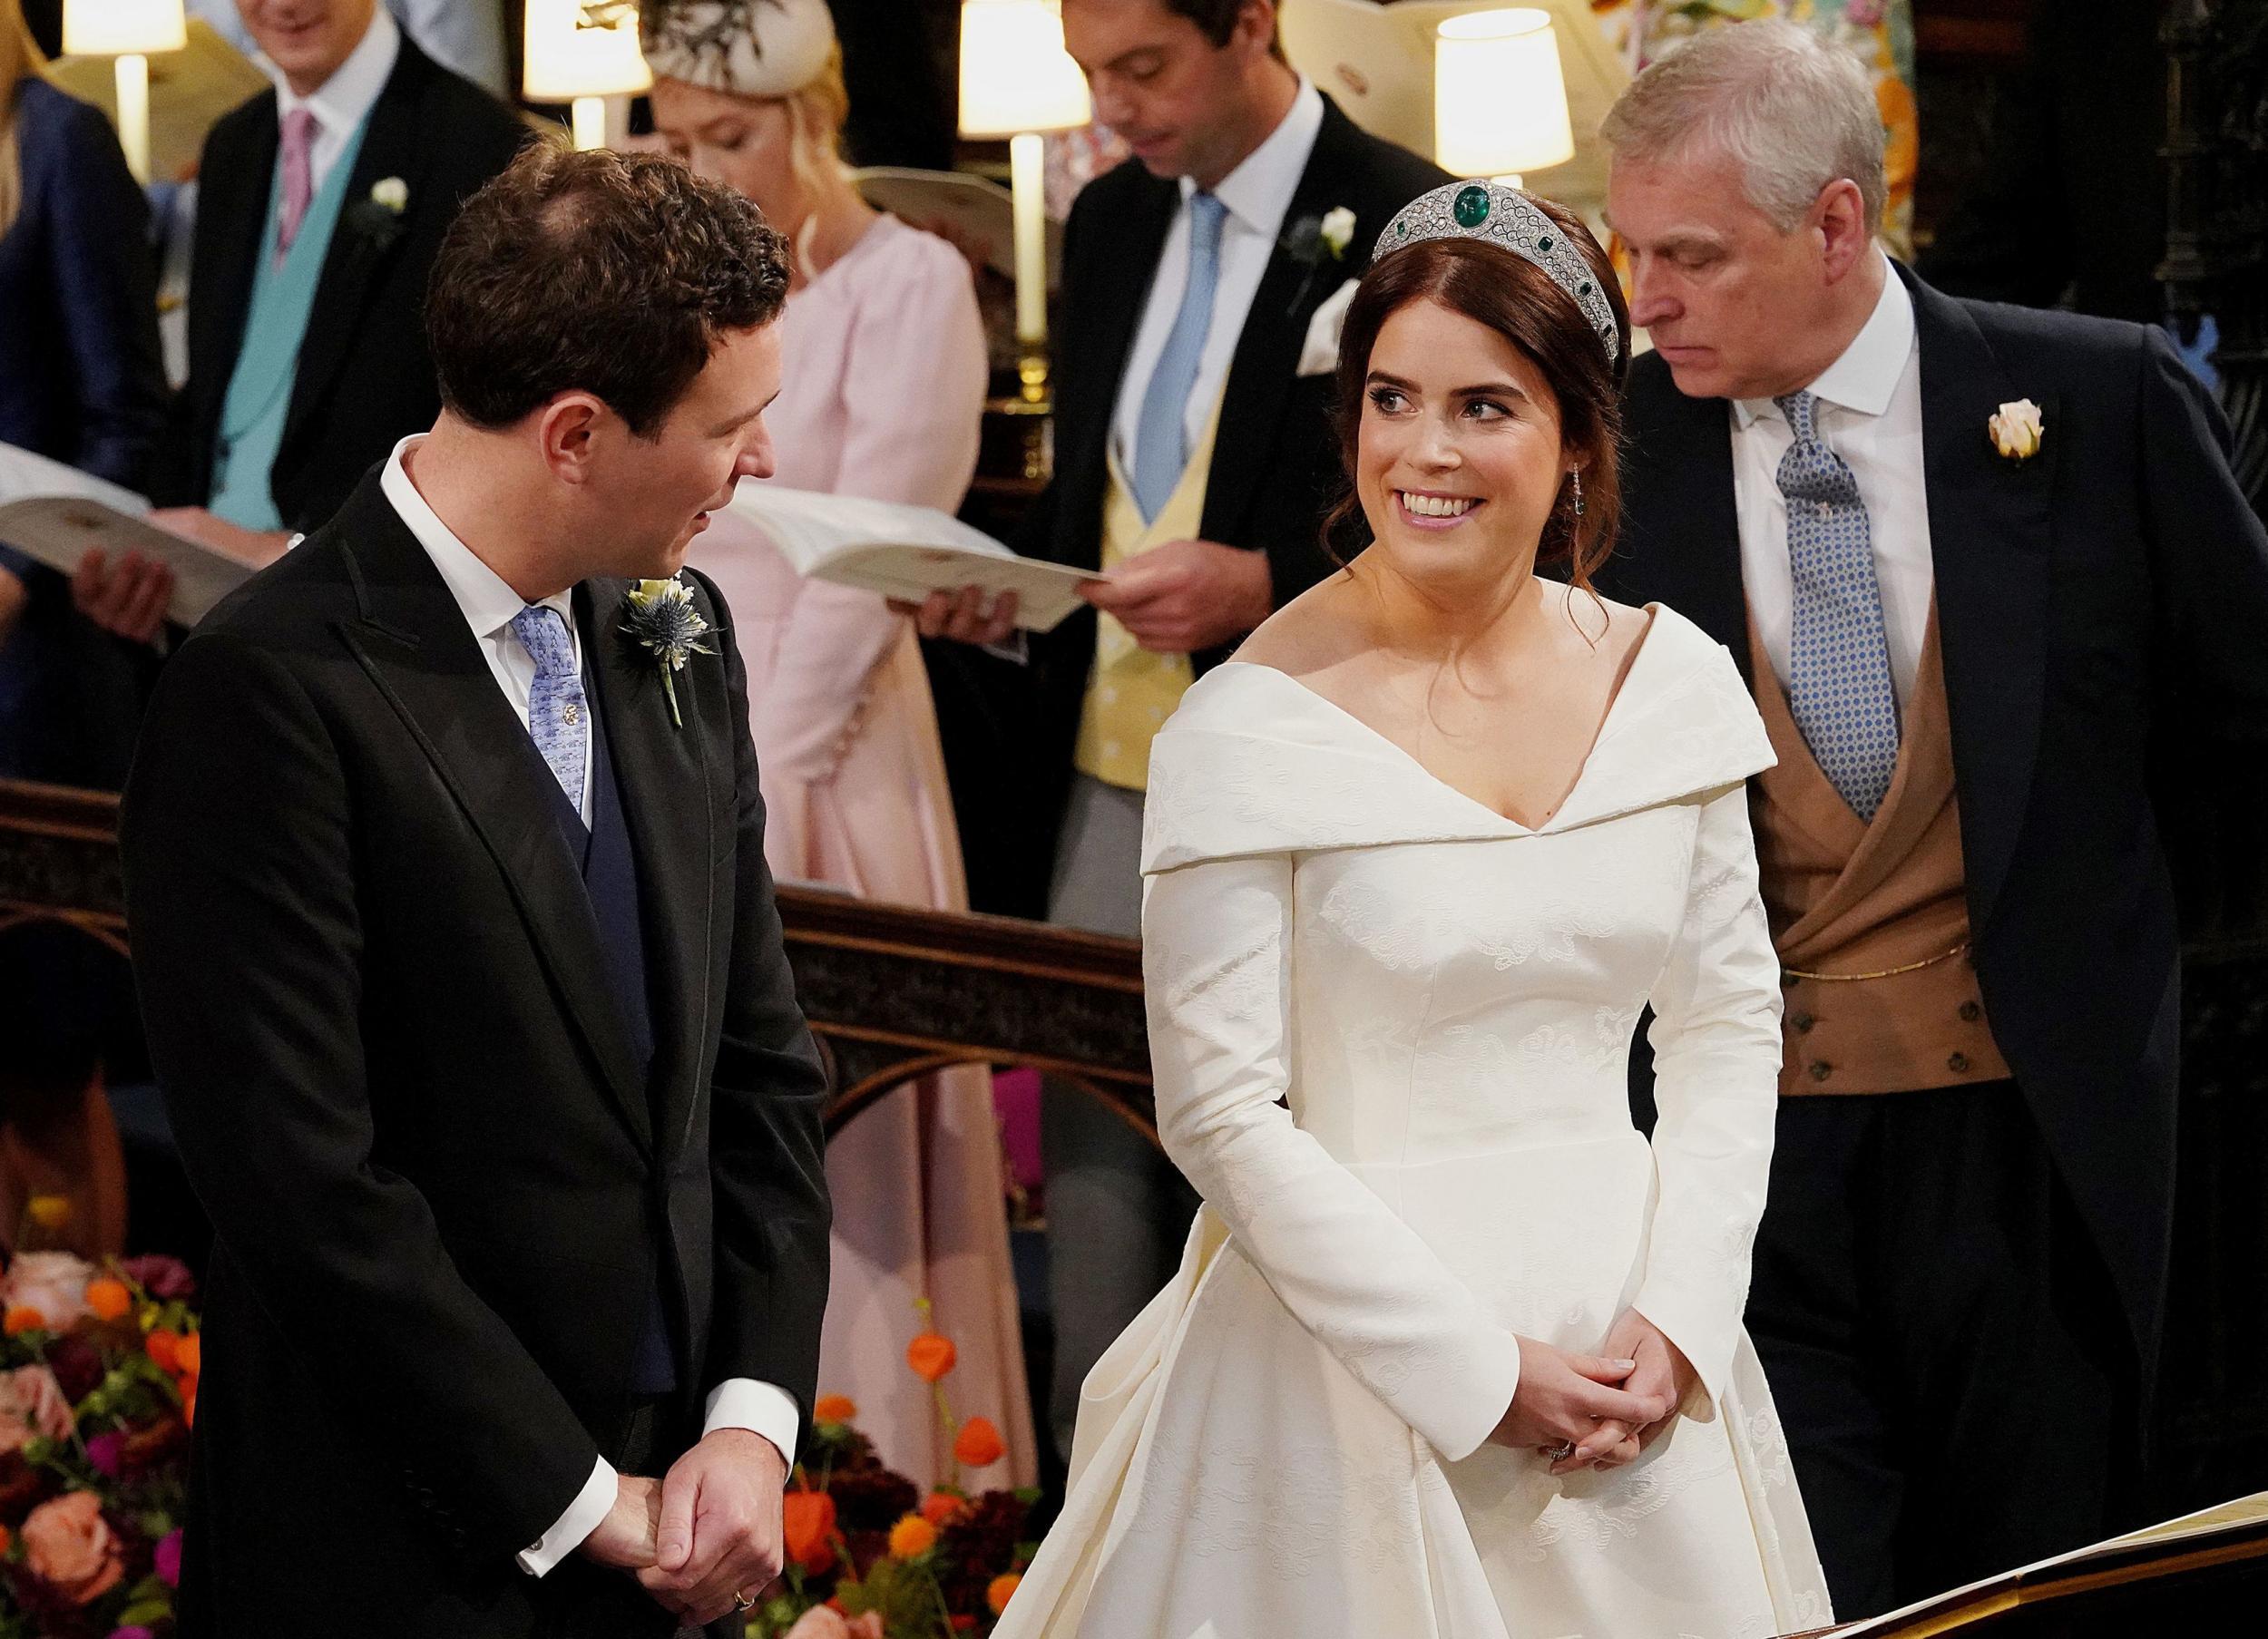 Princess Eugenie and Jack Brooksbank at their wedding ceremony in St George's Chapel